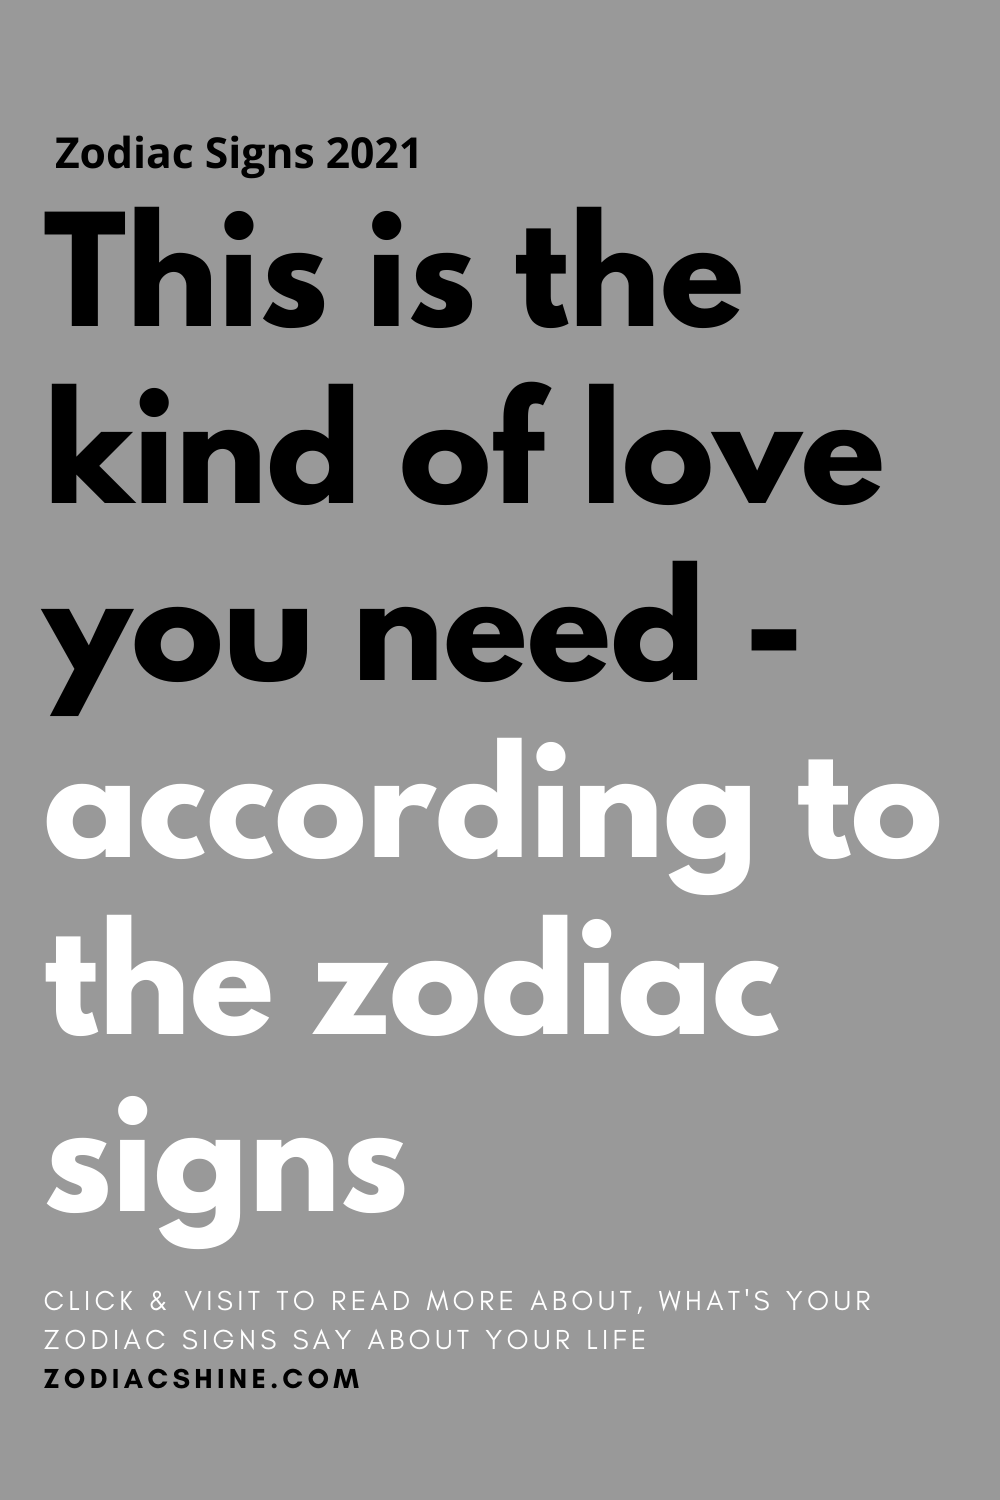 This is the kind of love you need - according to the zodiac signs